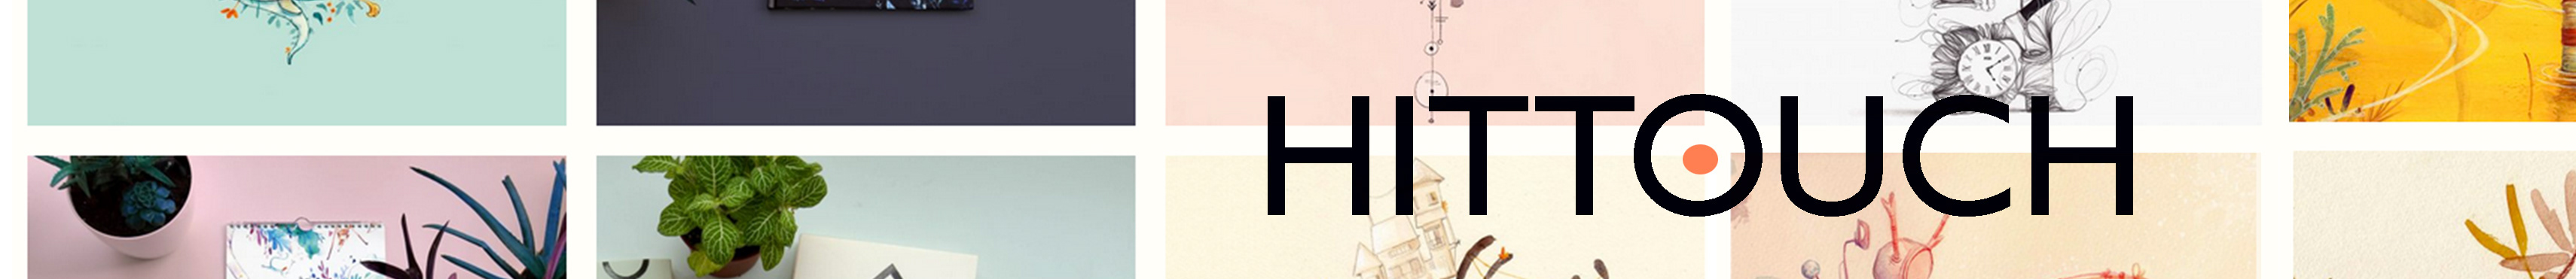 Hittouch illustration's profile banner